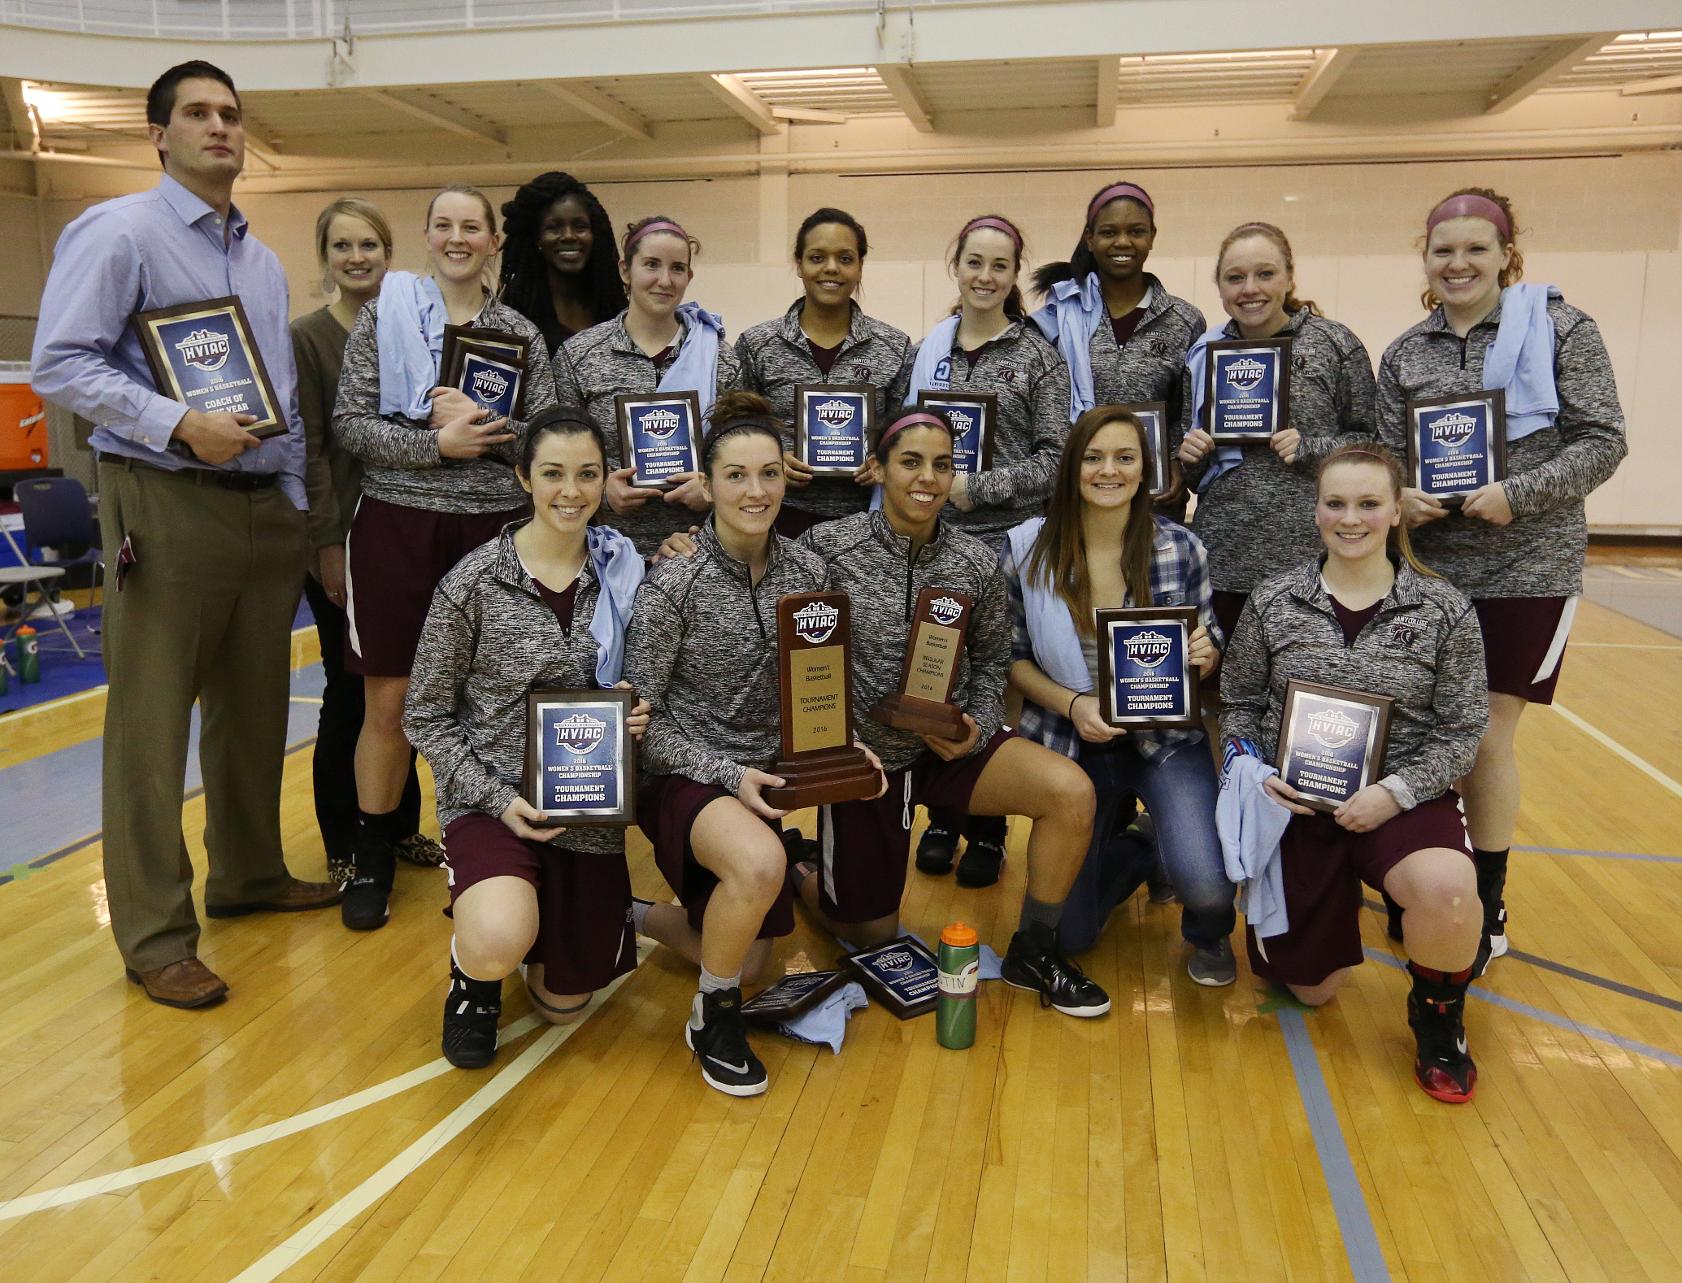 Albany Pharmacy Holds off CNR to Win Women's Basketball Championship